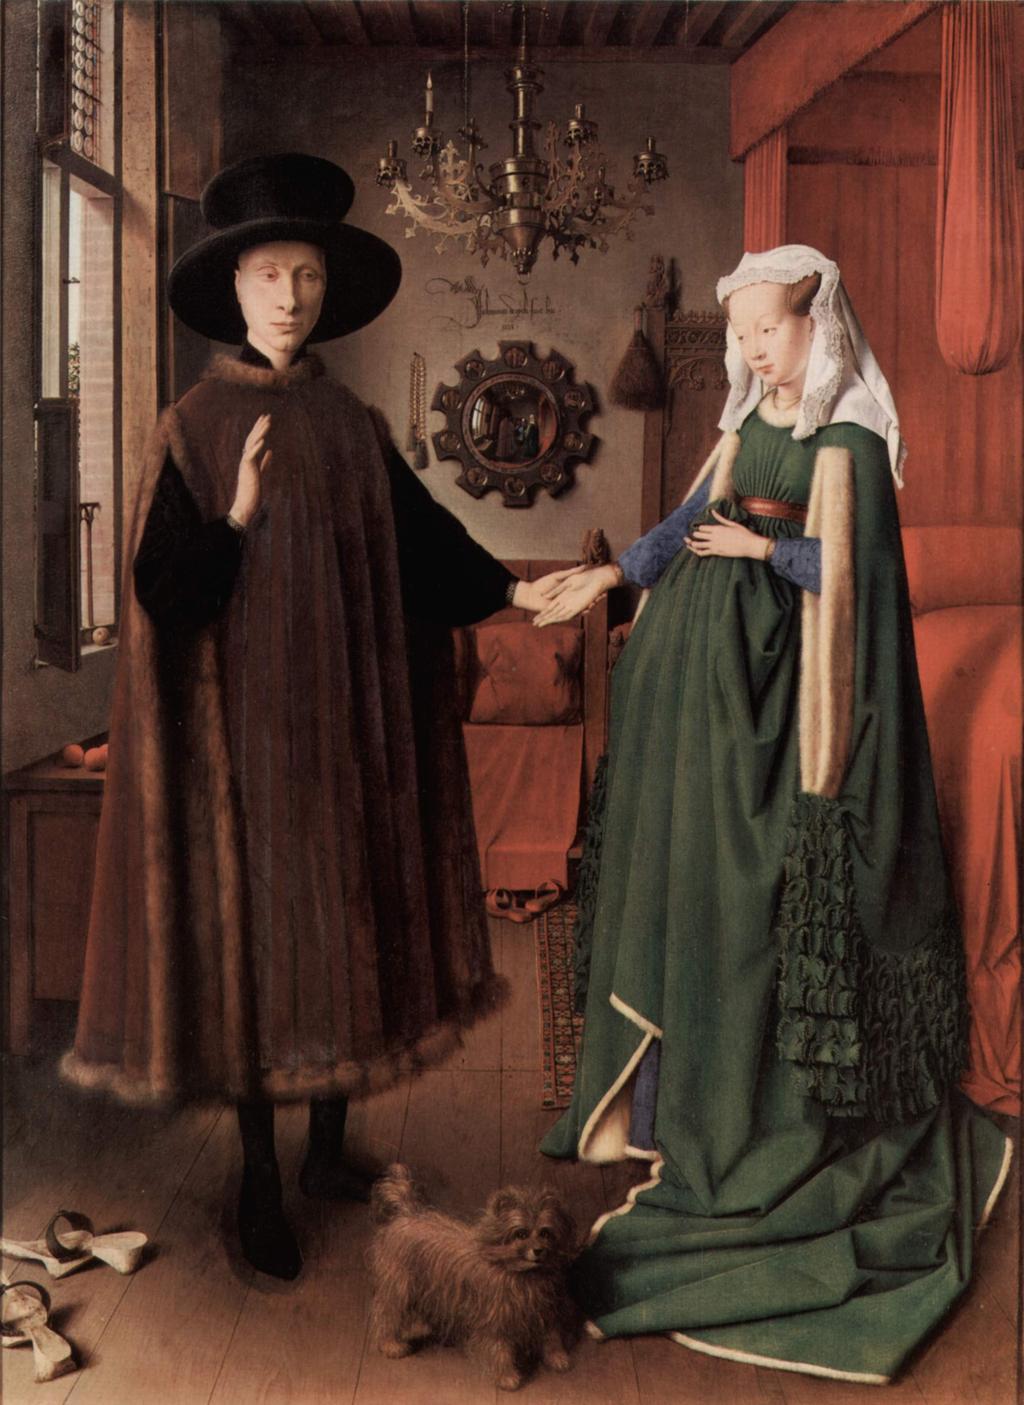 Jan Van Eyck, Double Portrait; Traditionally Known as Giovanni Arnolfini and his Wife, Giovanna Cenami, 1434, Oil on wood panel, 33 x 22 inches, National Gallery, London.